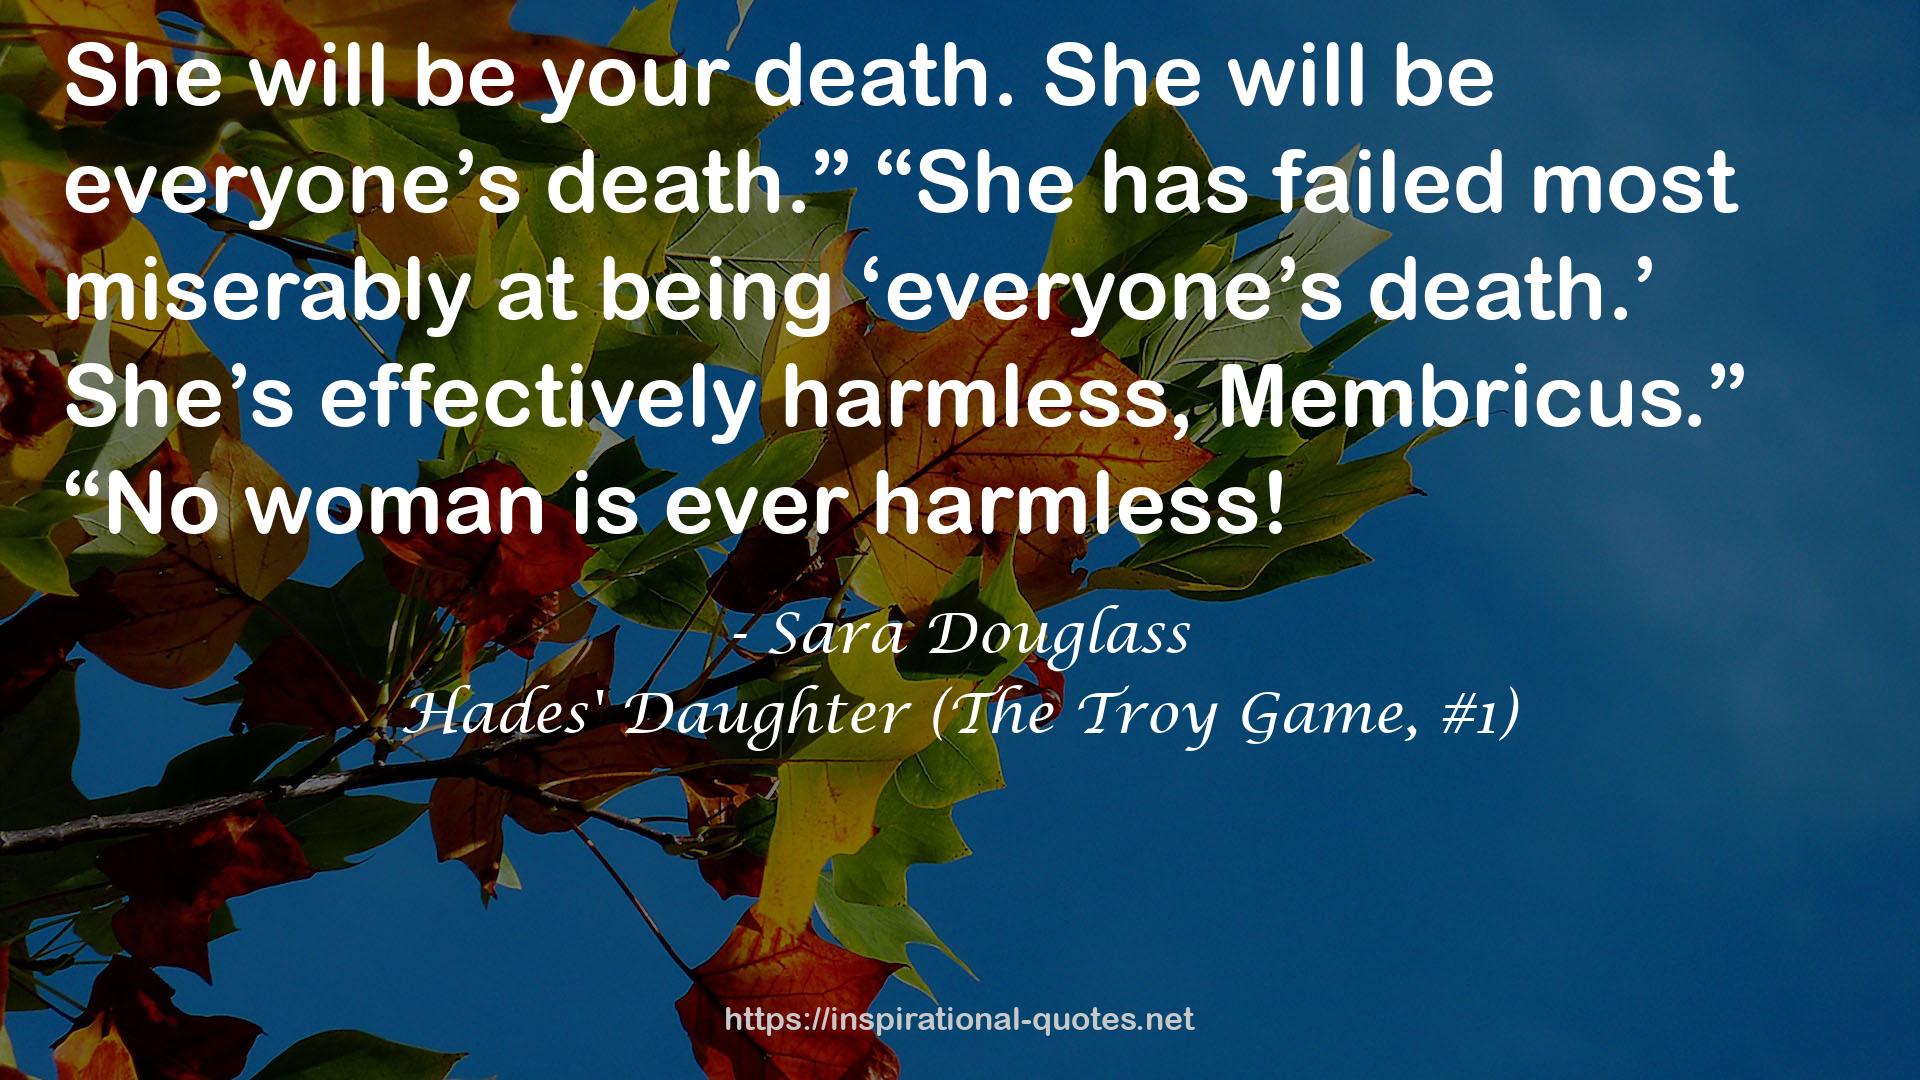 Hades' Daughter (The Troy Game, #1) QUOTES